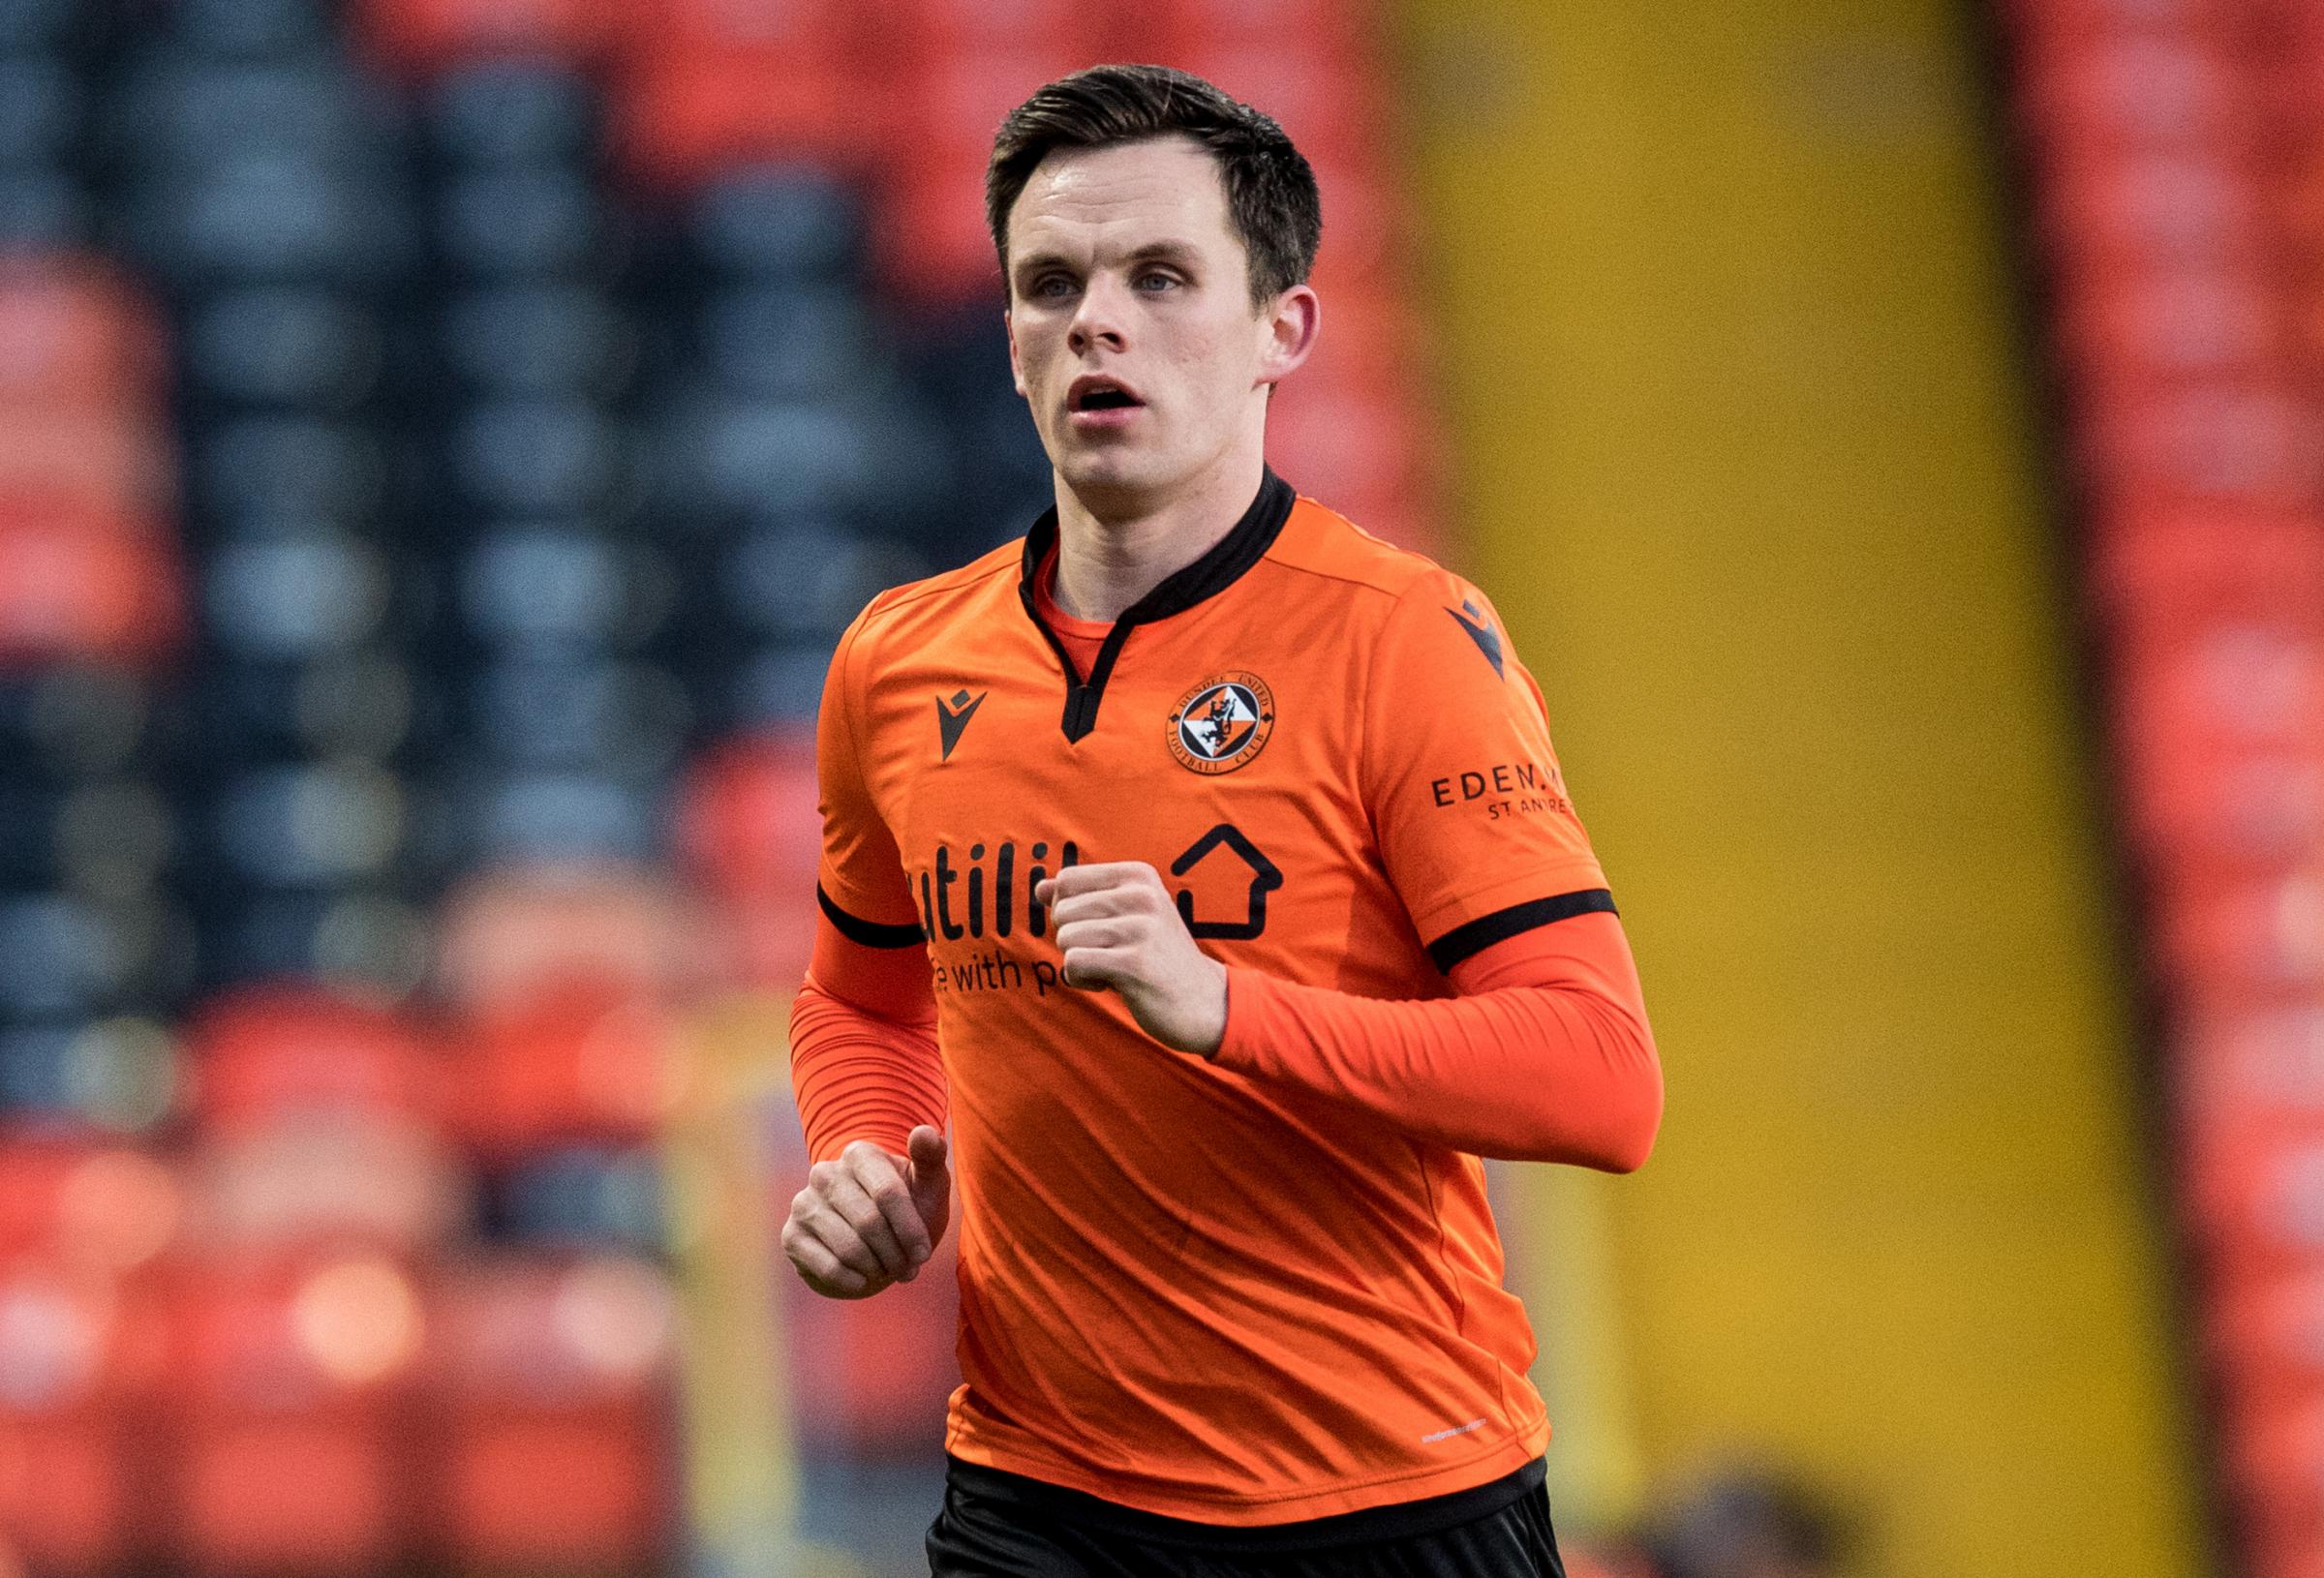 Dundee United striker Lawrence Shankland draws upon Ally McCoist advice after Ross County strike